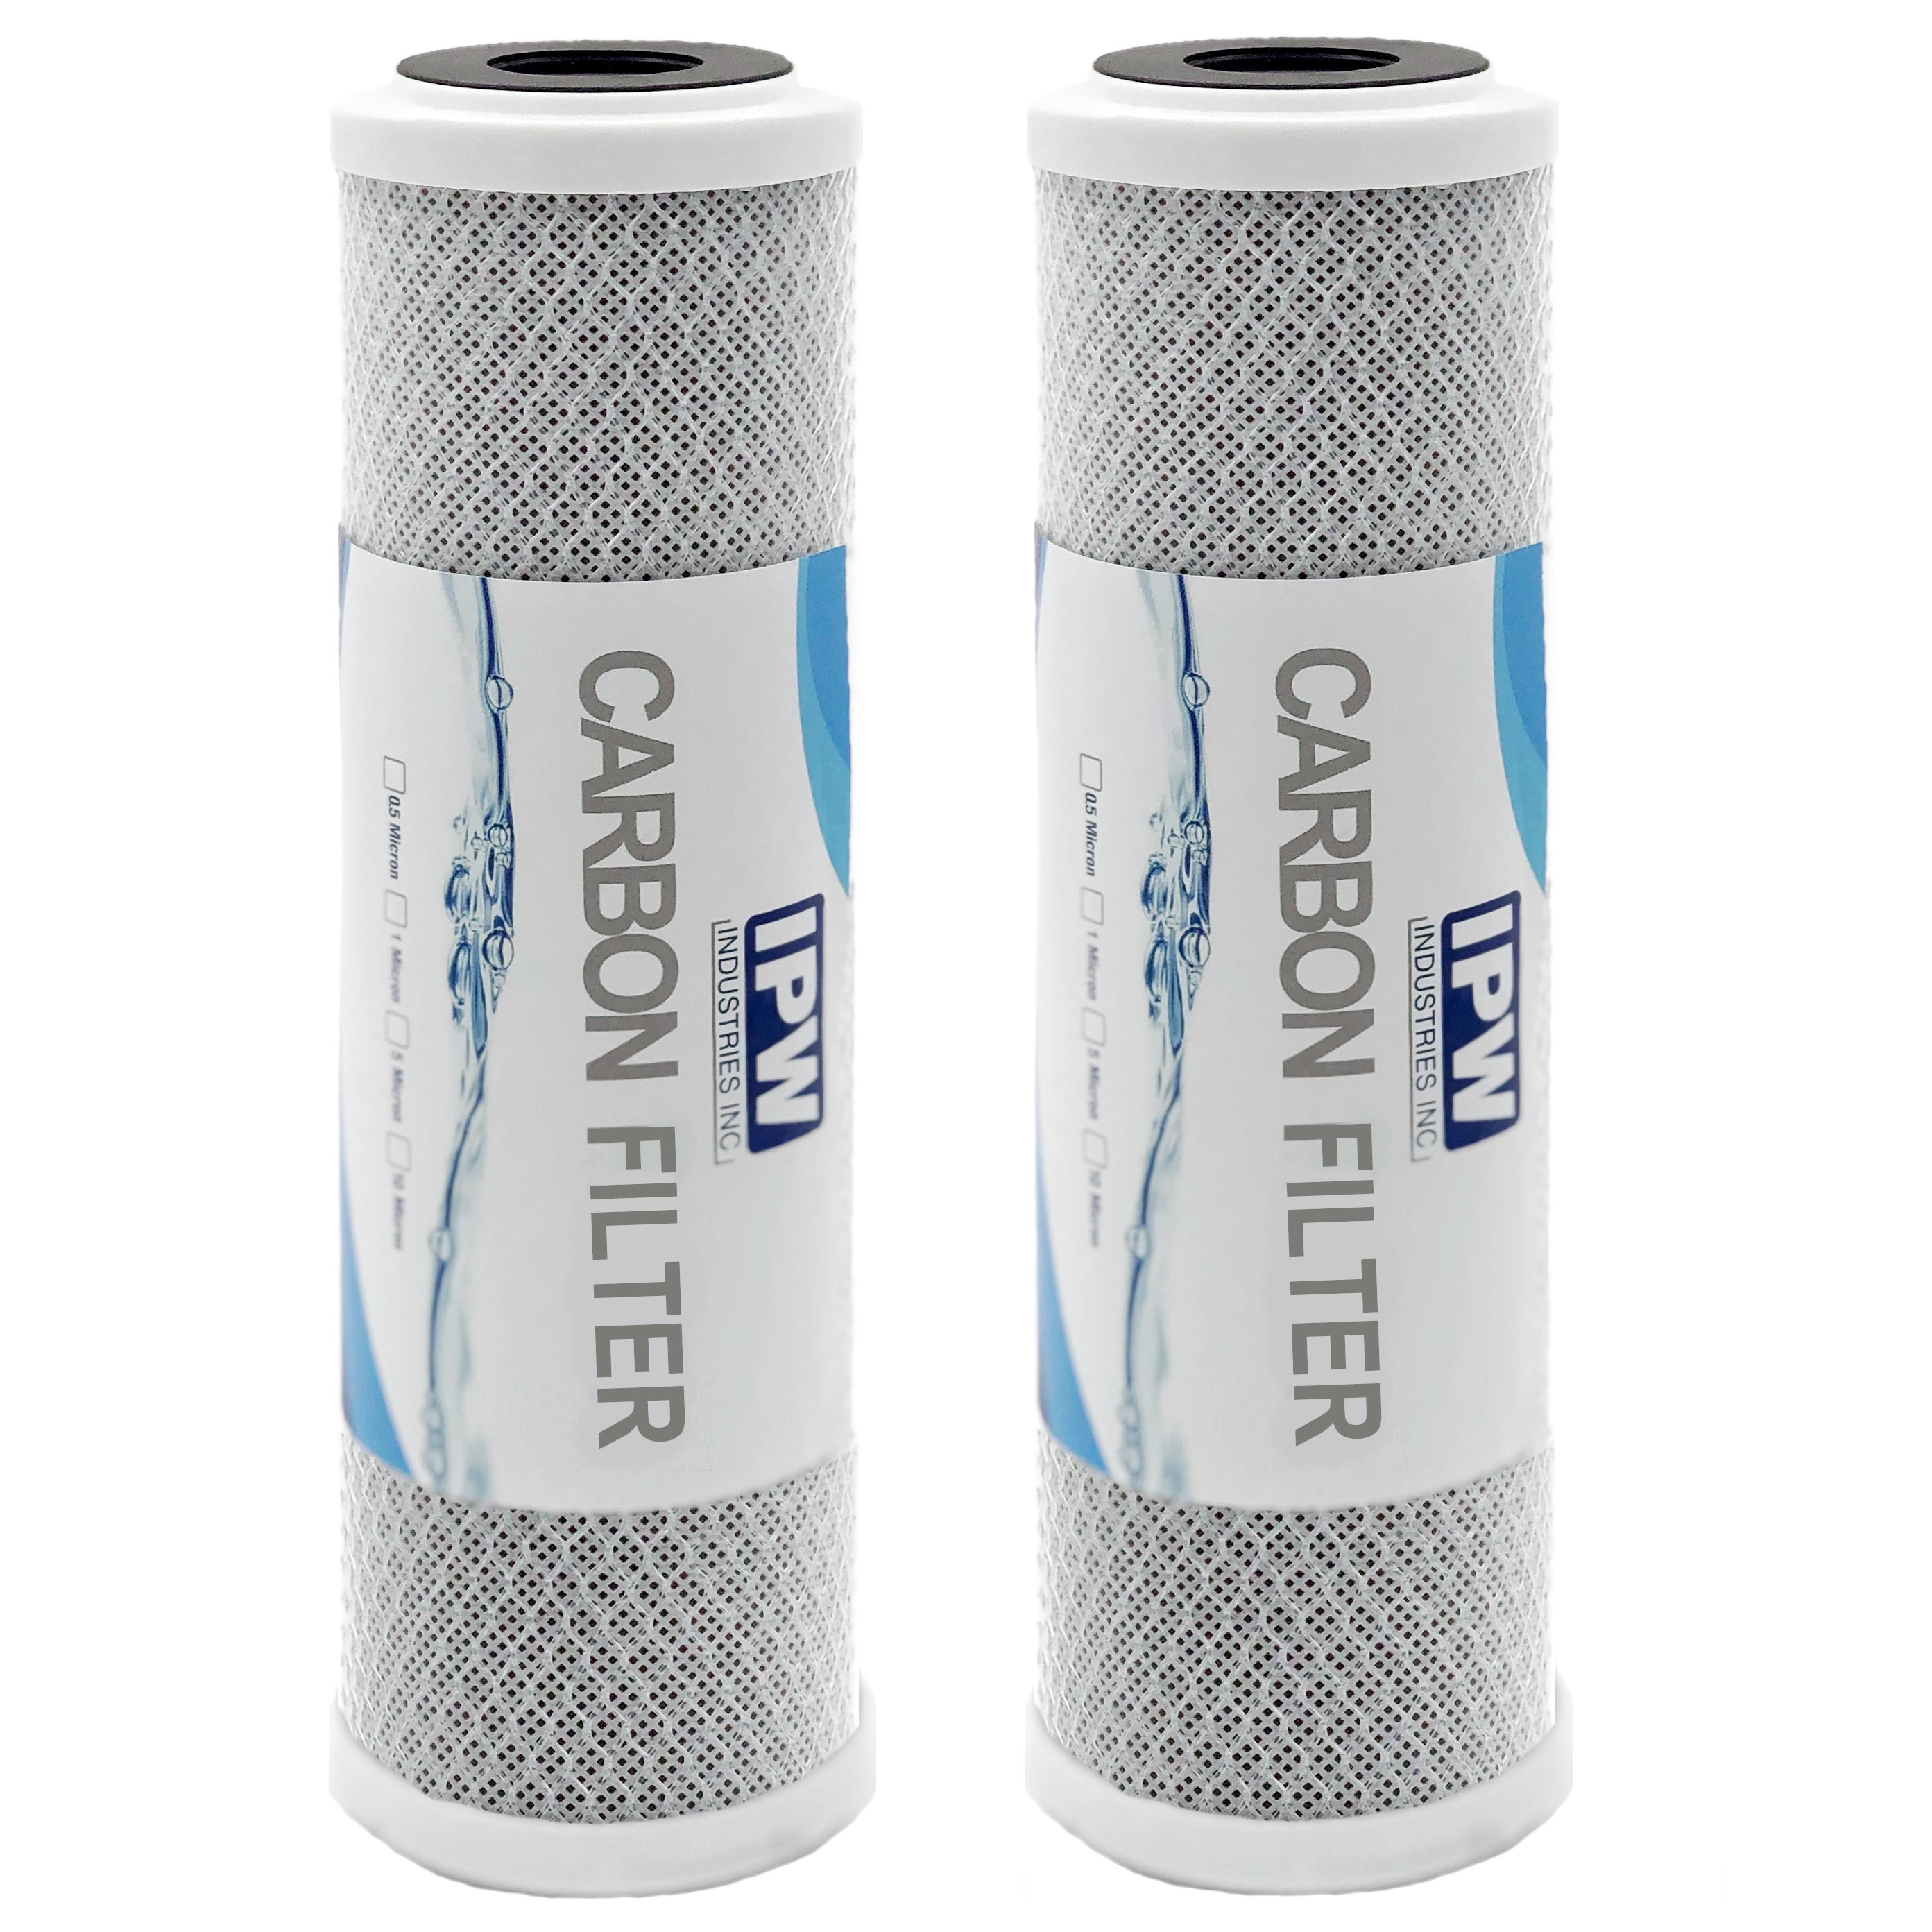 Kenmore Ultrafilter Compatible Pre & Post Carbon Filter Cartridge (2-pack) Fits 42-34370 By Ipw Industries Inc